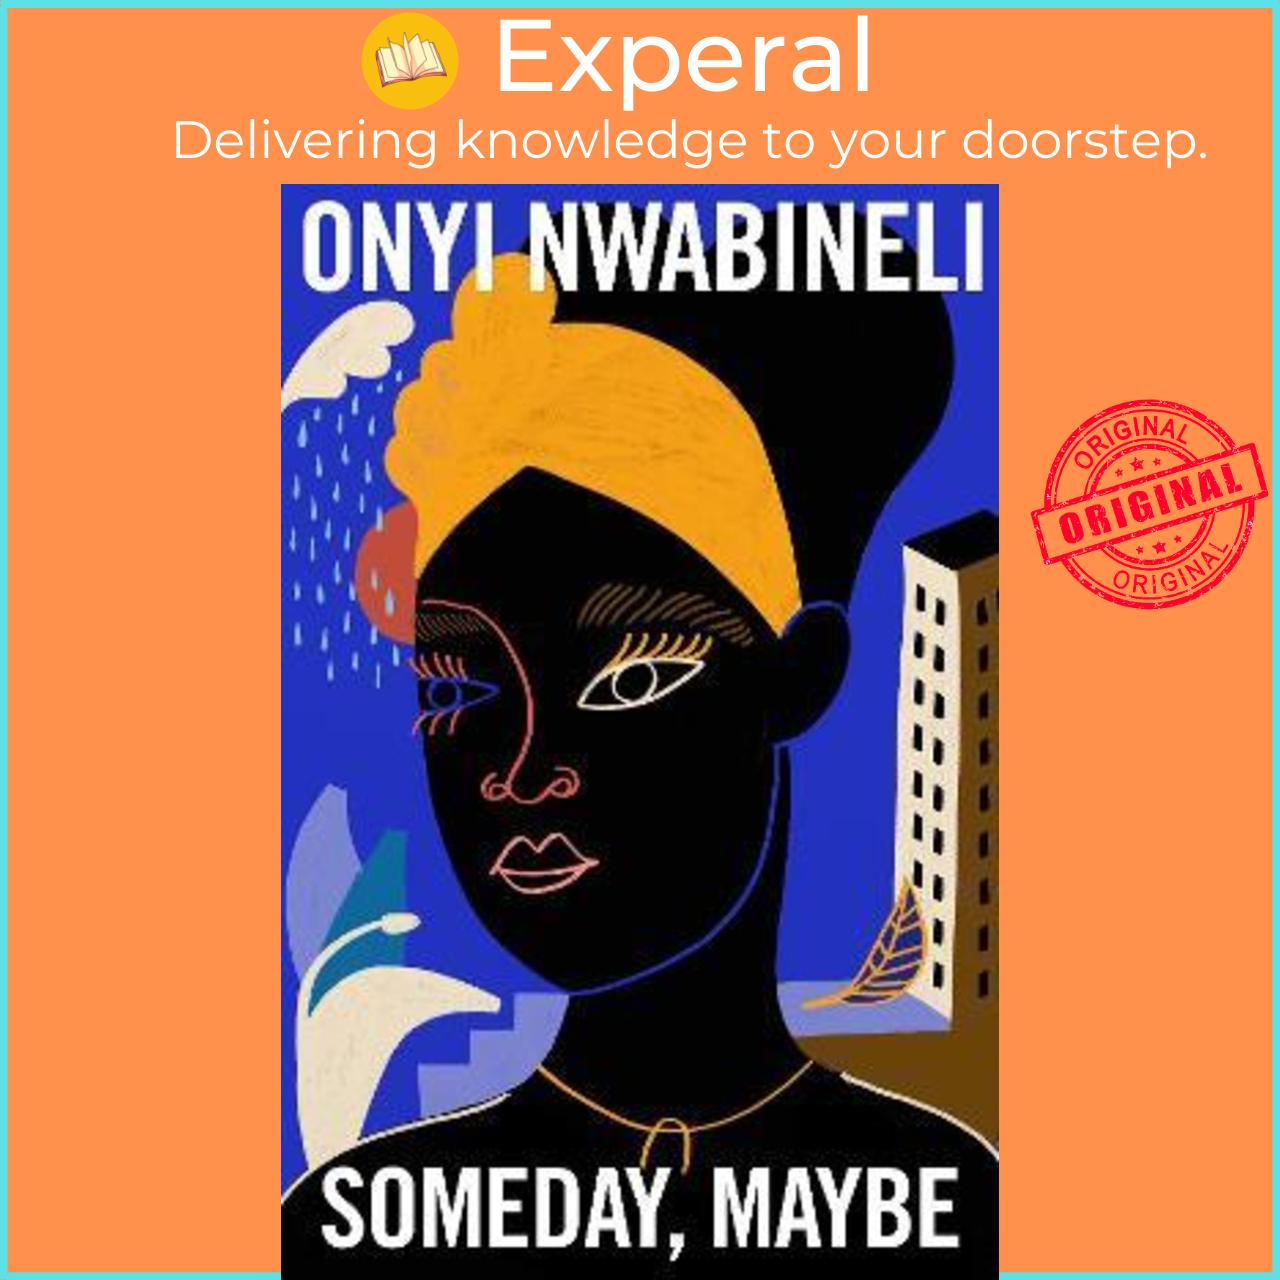 Sách - Someday, Maybe by Onyi Nwabineli (UK edition, hardcover)